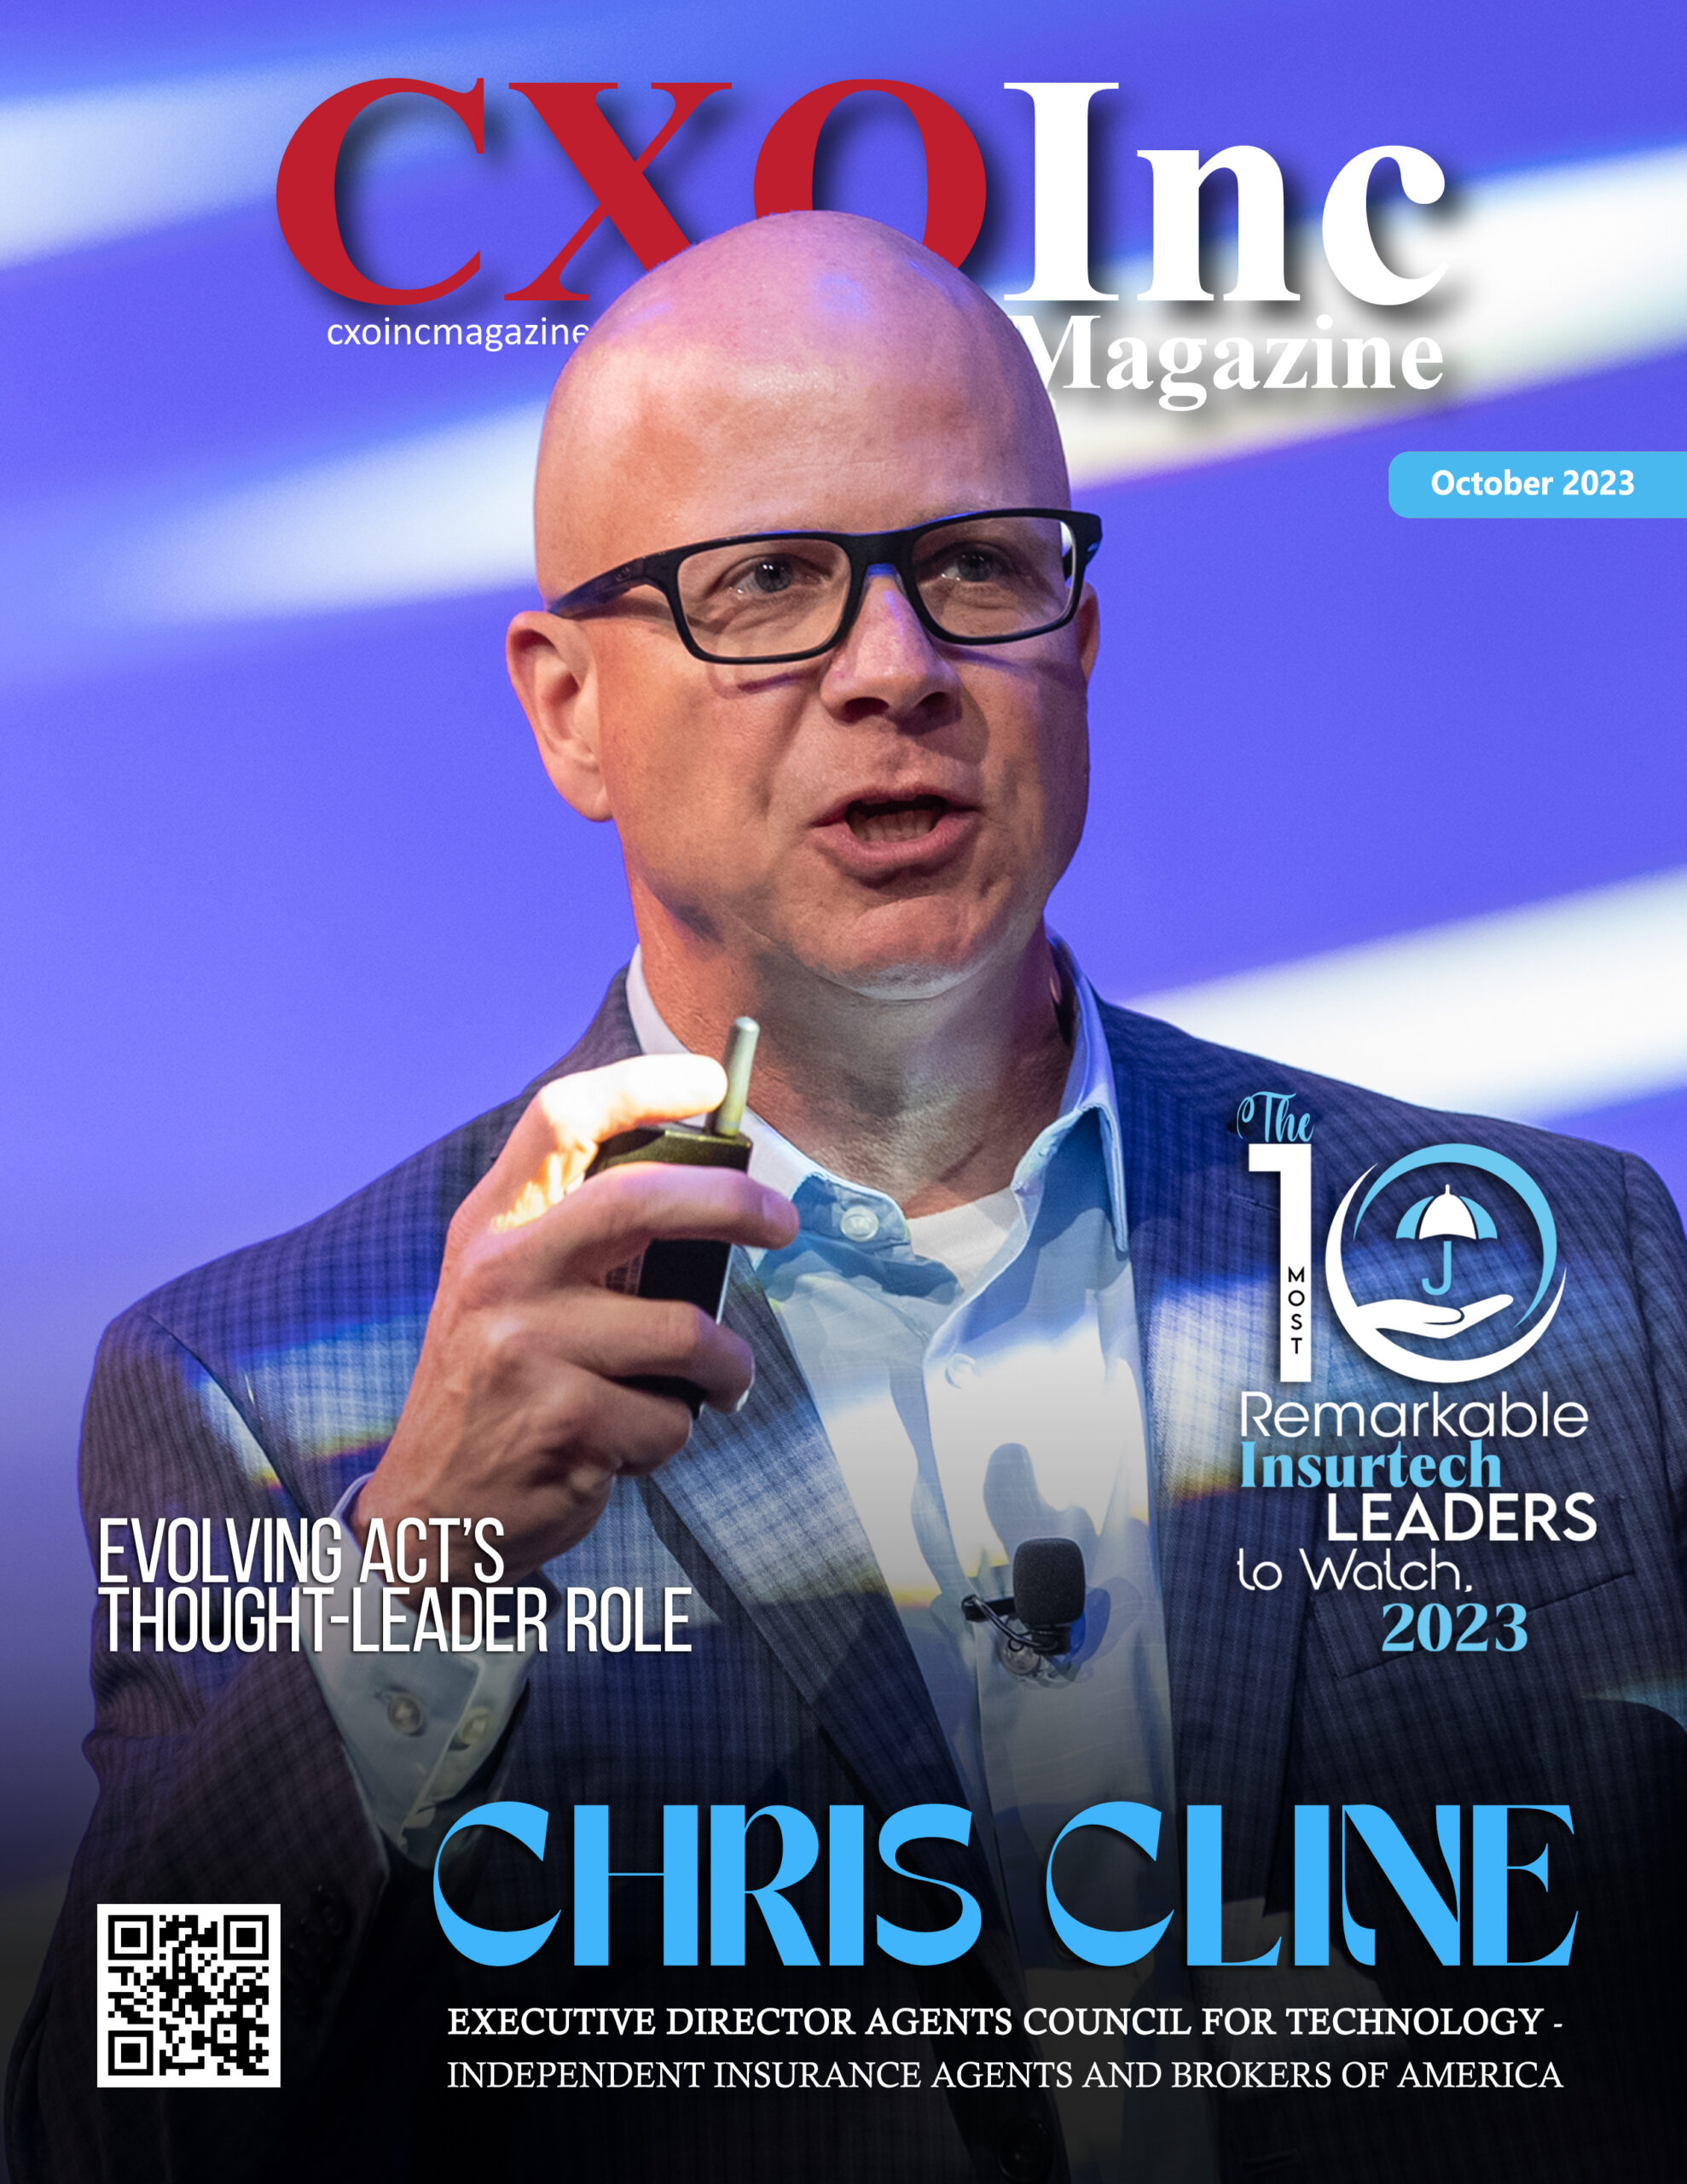 Chris Cline | Executive Director of Agents Council for Technology | Independent Insurance Agents and Brokers of America | CXO Inc Magazine